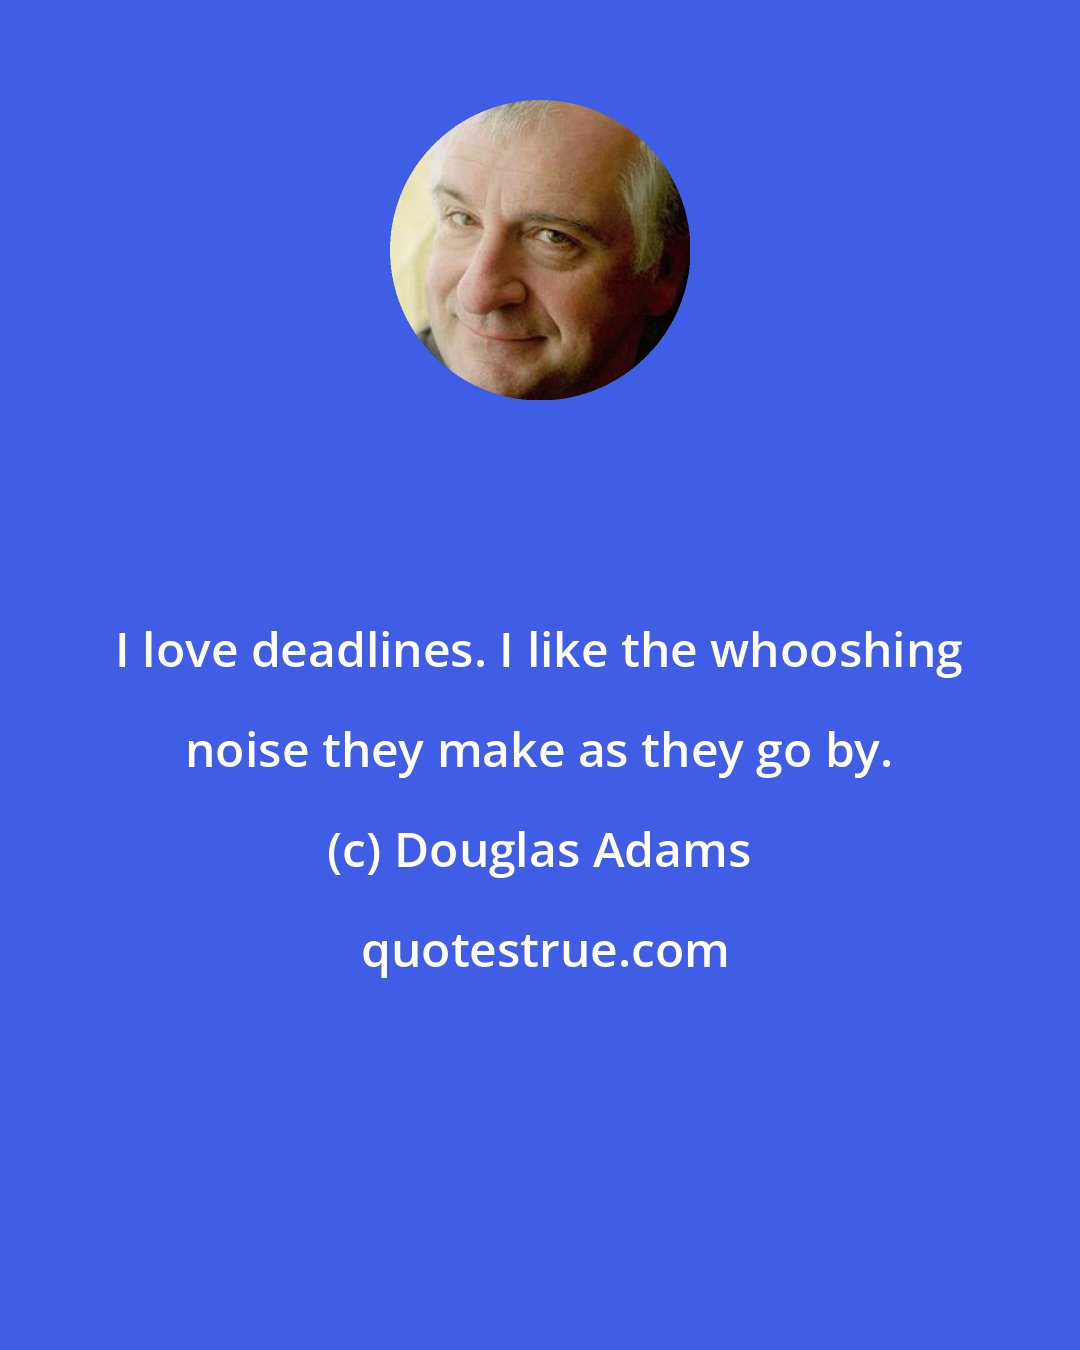 Douglas Adams: I love deadlines. I like the whooshing noise they make as they go by.